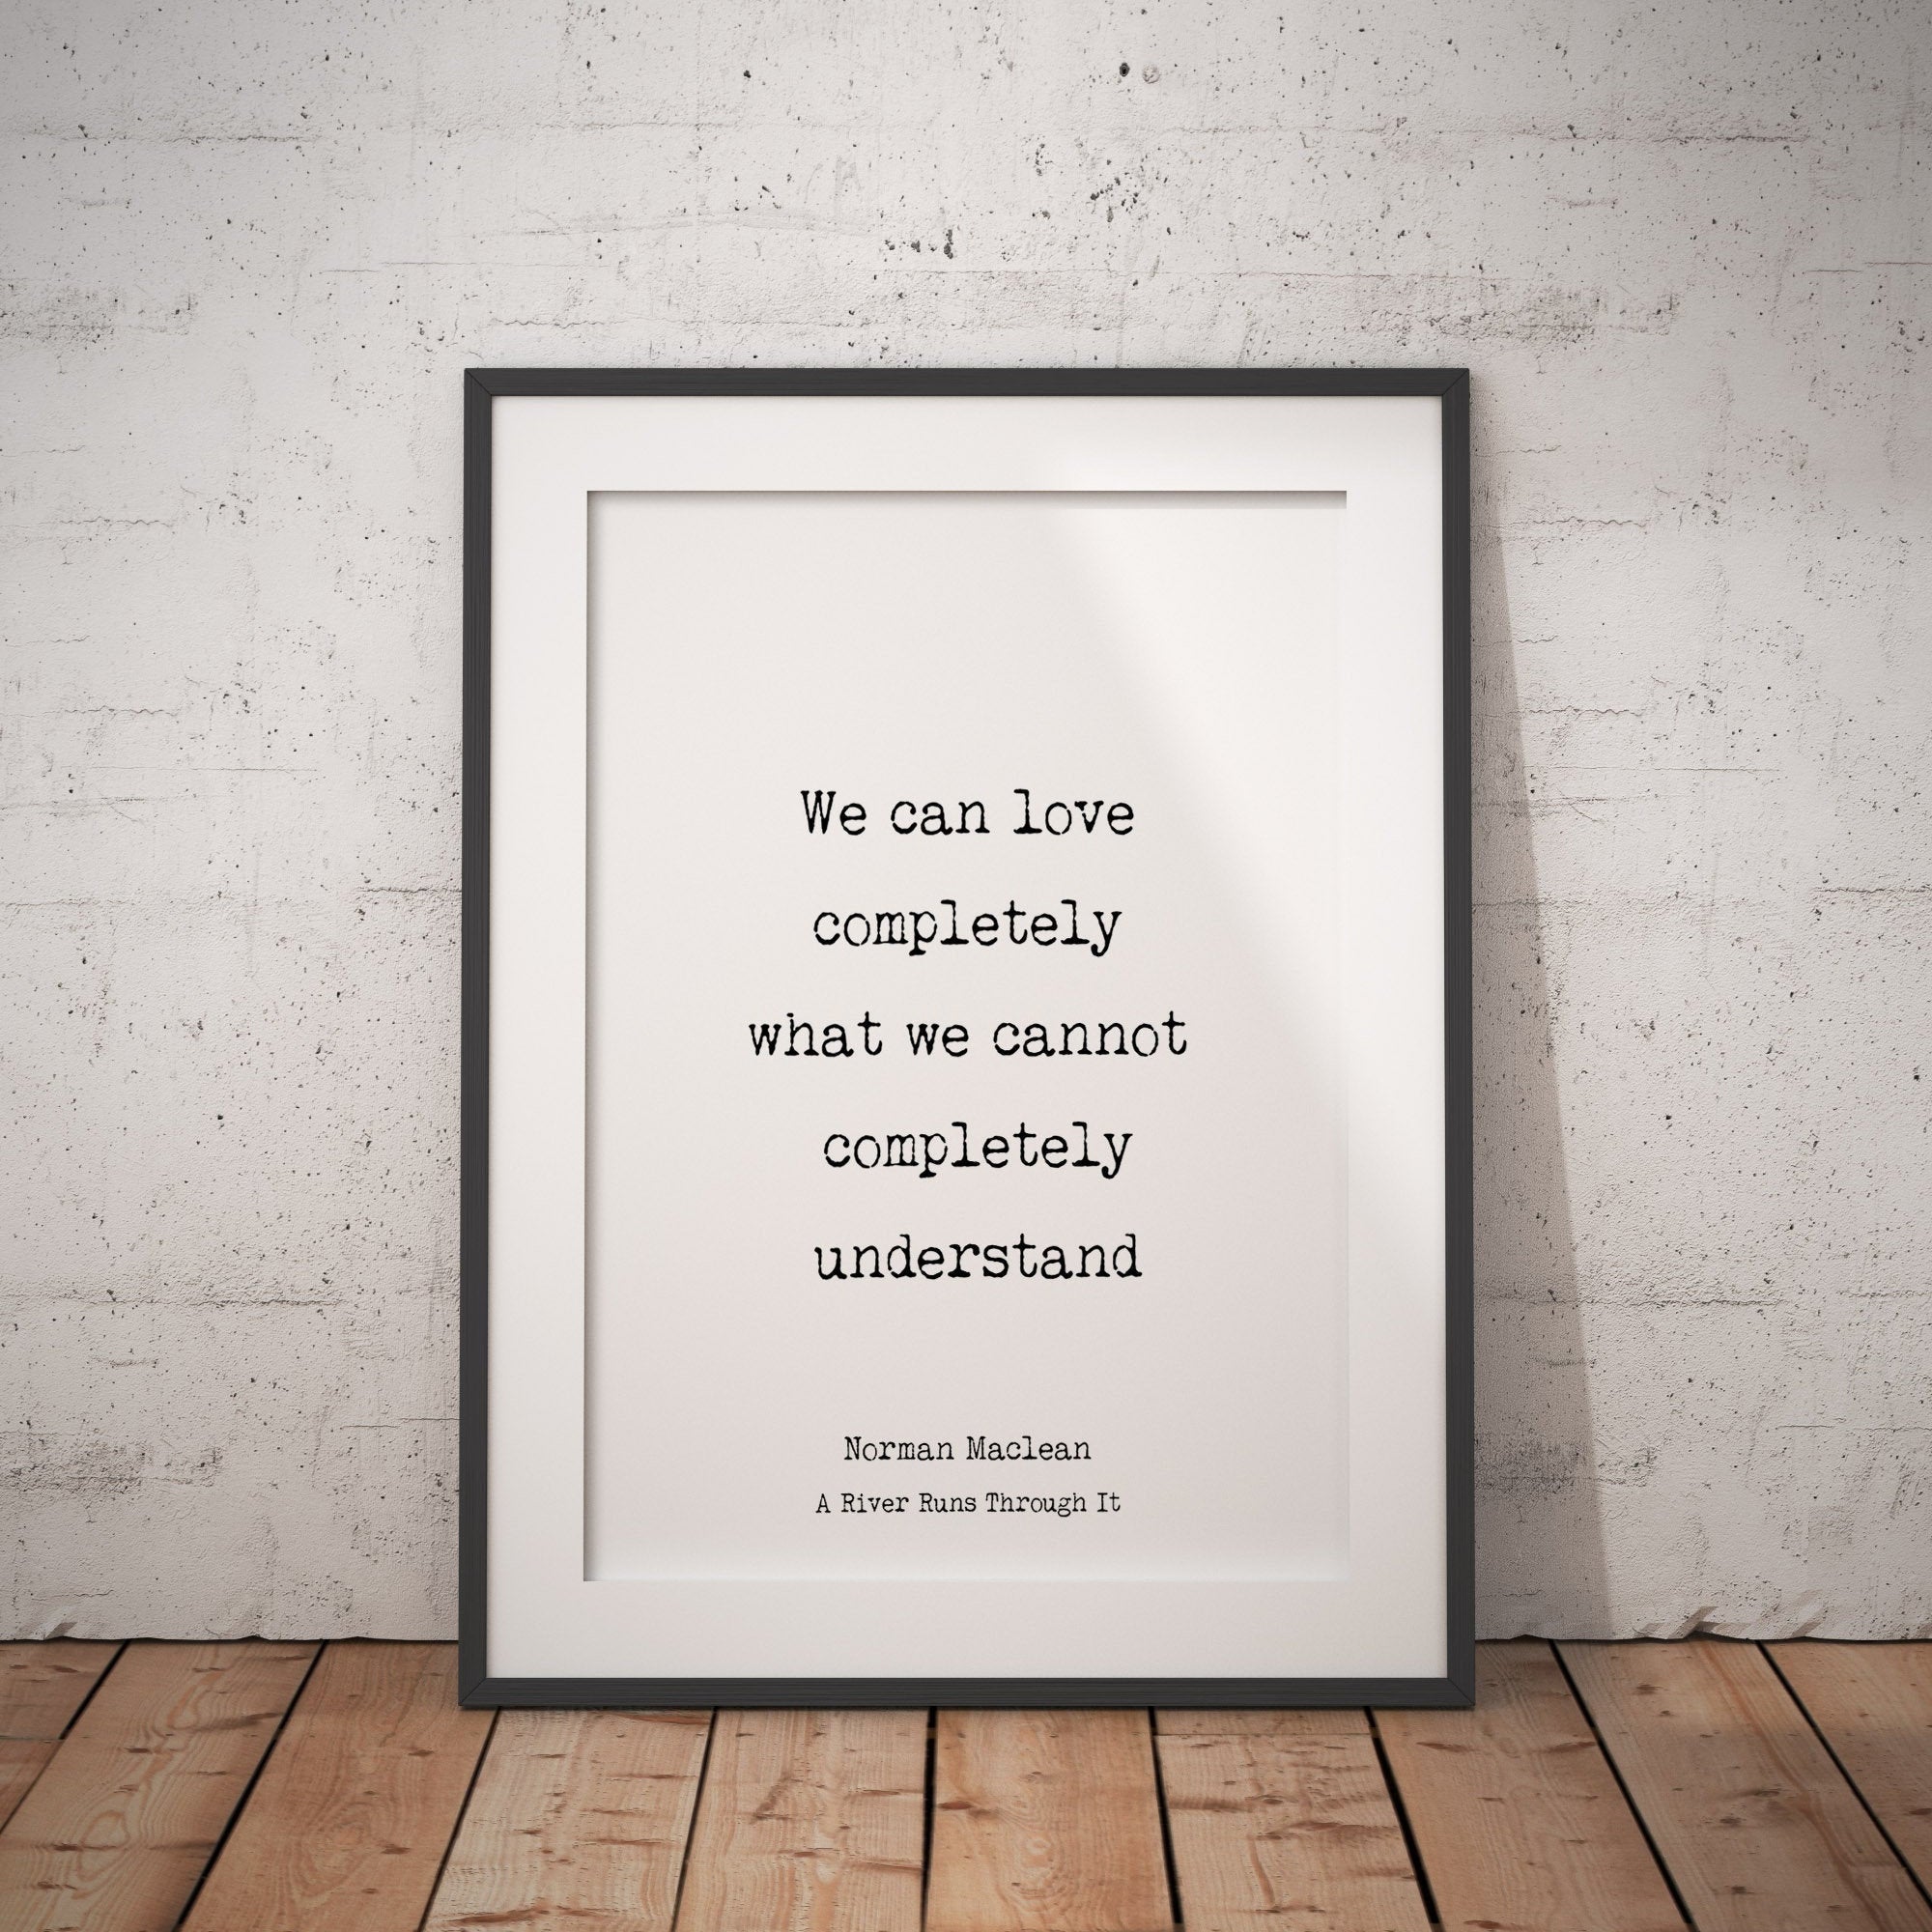 A river runs through it norman maclean quote print, we can love completely